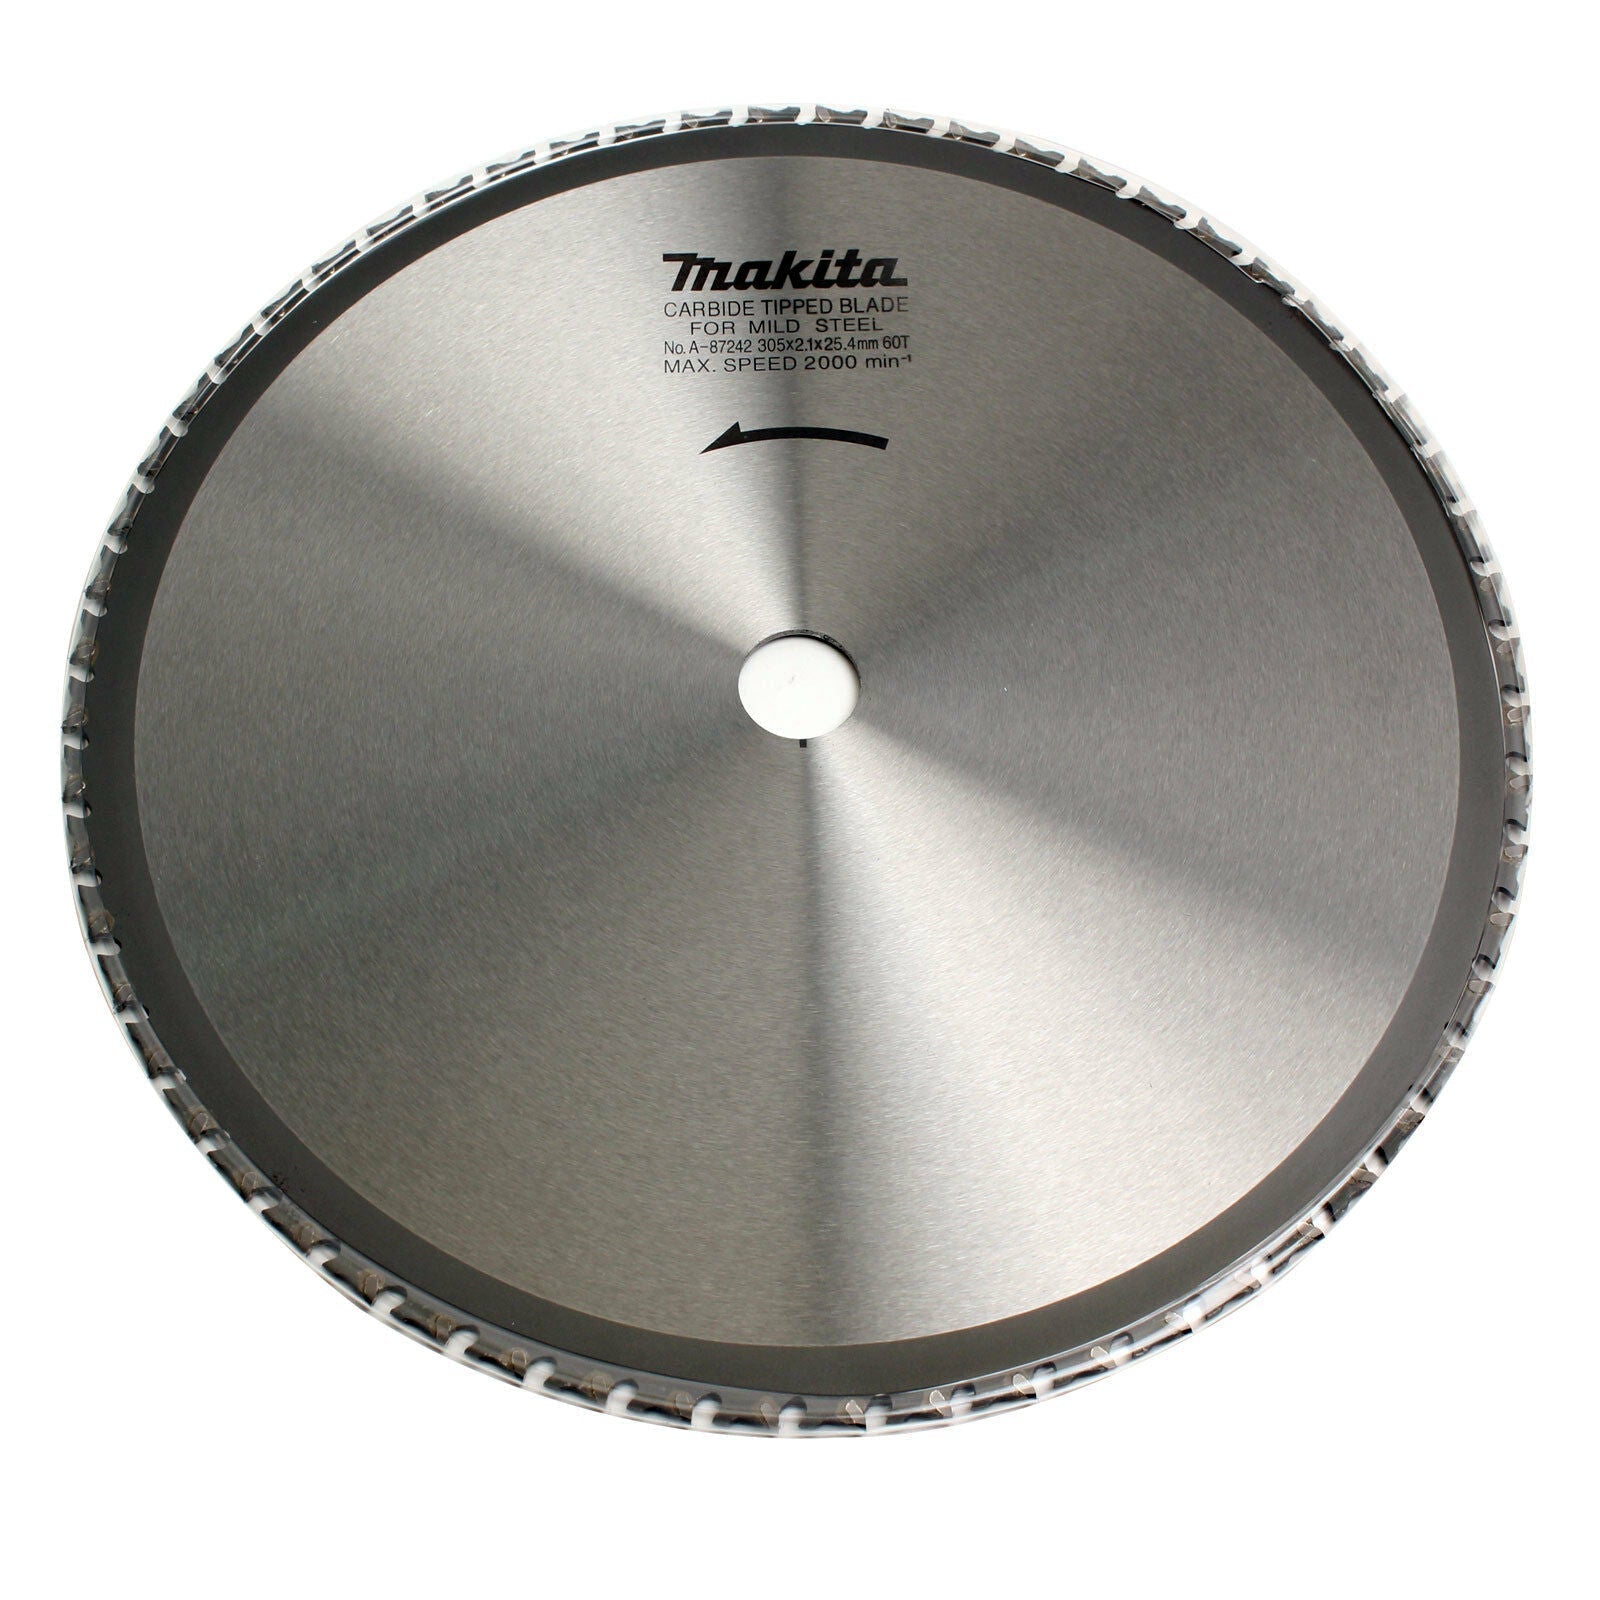 Makita 305mm Cold Cut Cut-Off Saw Blade A-87242 Power Tool Services